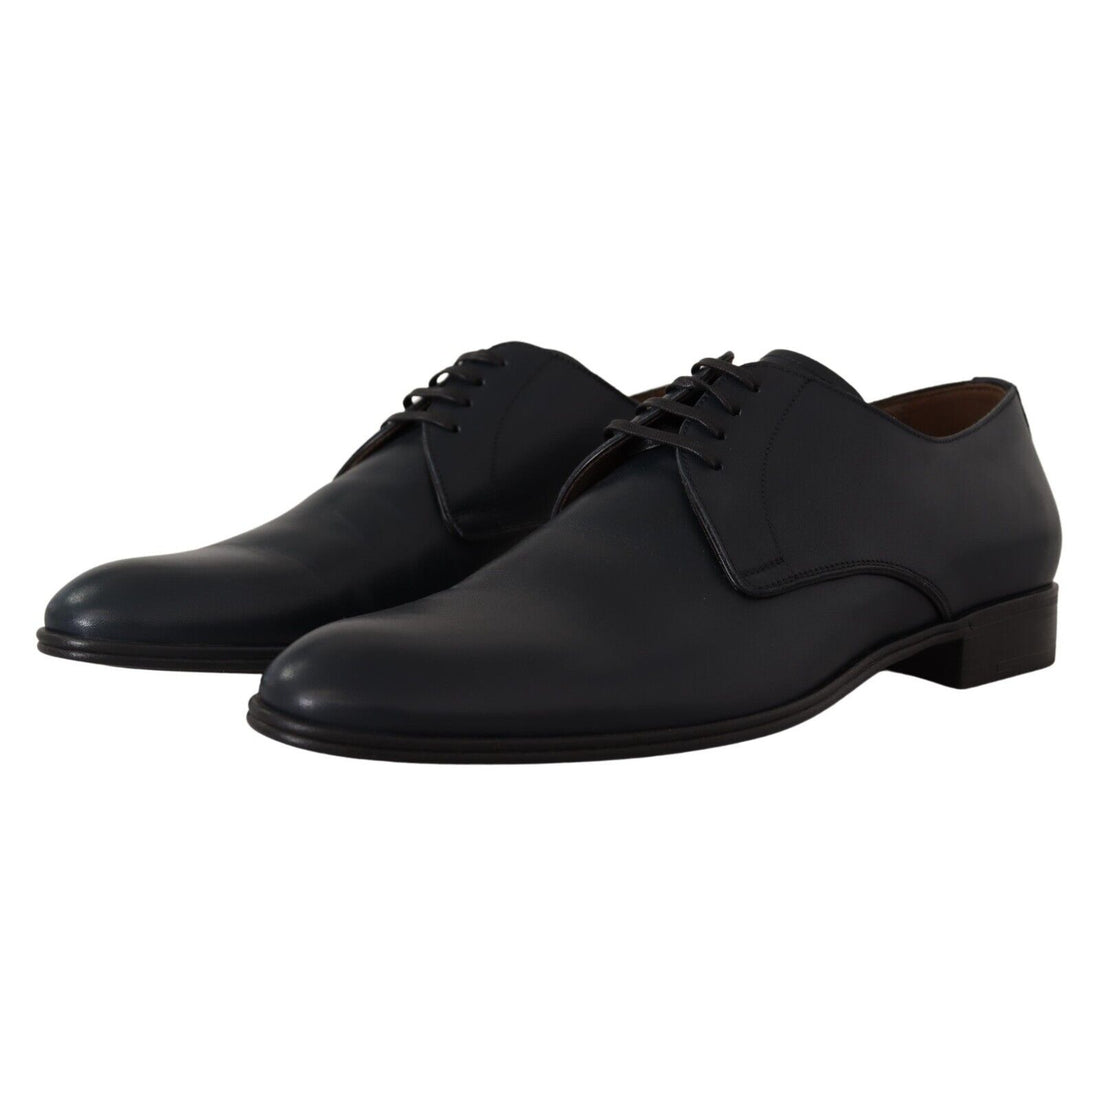 Dolce & Gabbana Navy Blue Leather Lace Up Formal Derby Shoes